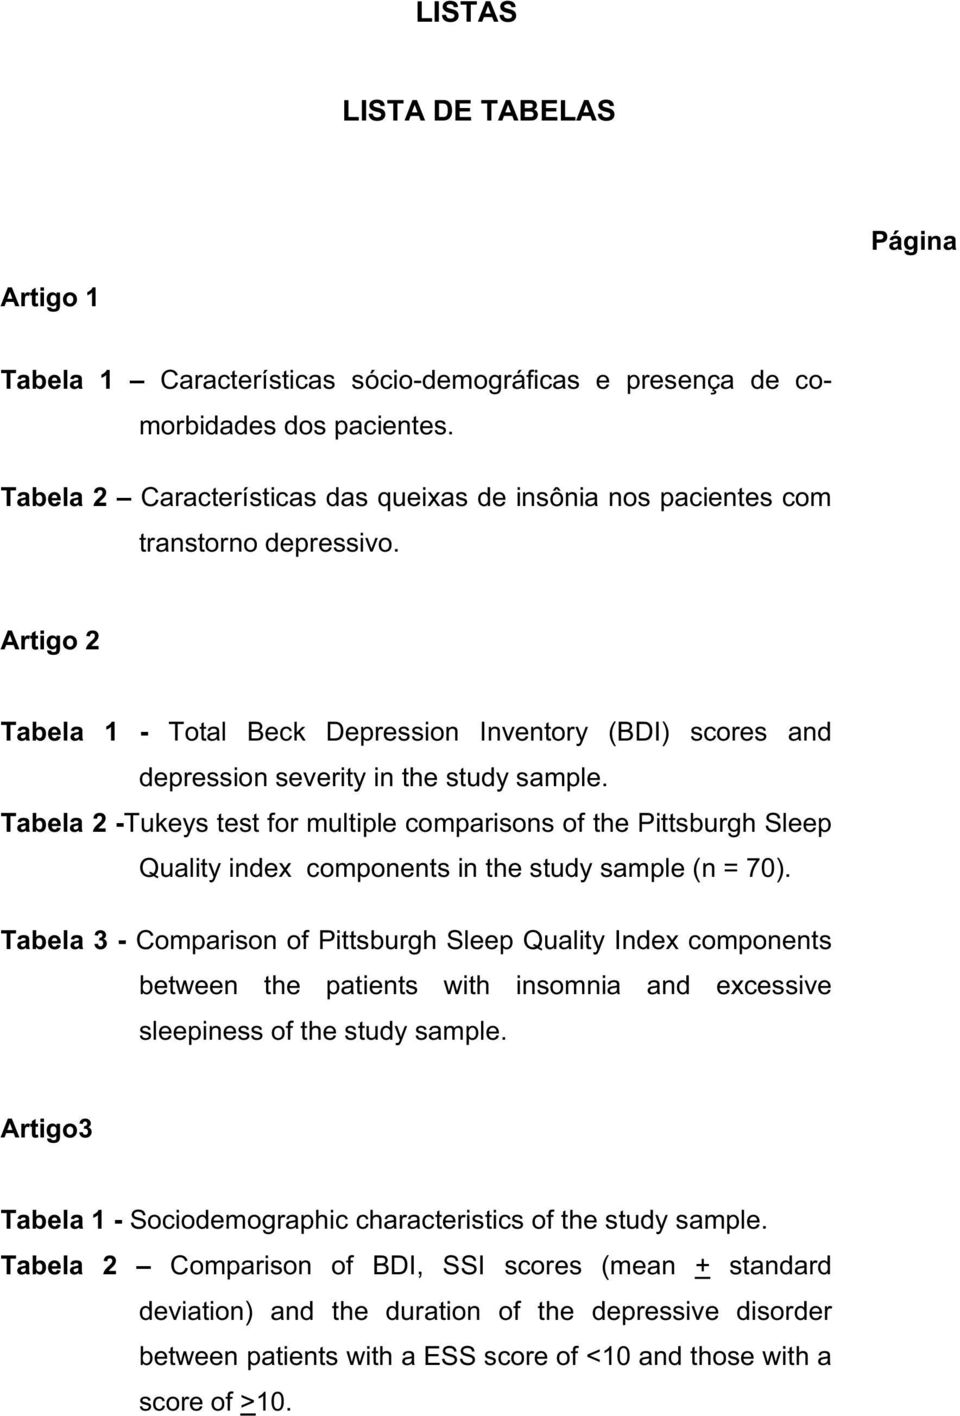 Tabela 2 -Tukeys test for multiple comparisons of the Pittsburgh Sleep Quality index components in the study sample (n = 70).